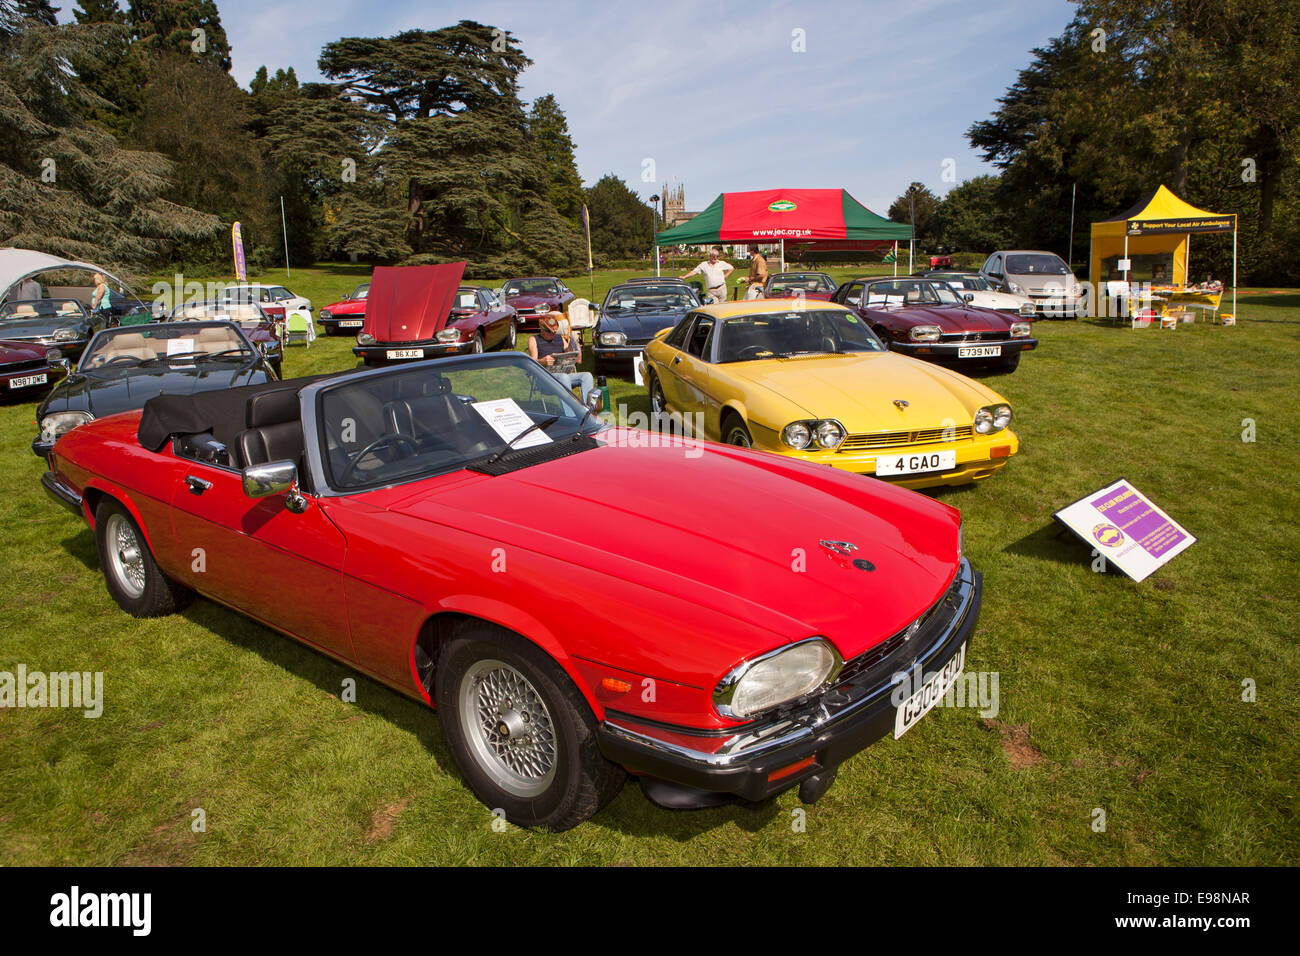 UK, England, Warwickshire, Warwick Castle, Jaguar Enthusiasts Club display of XJS convertible and cabriolet cars Stock Photo